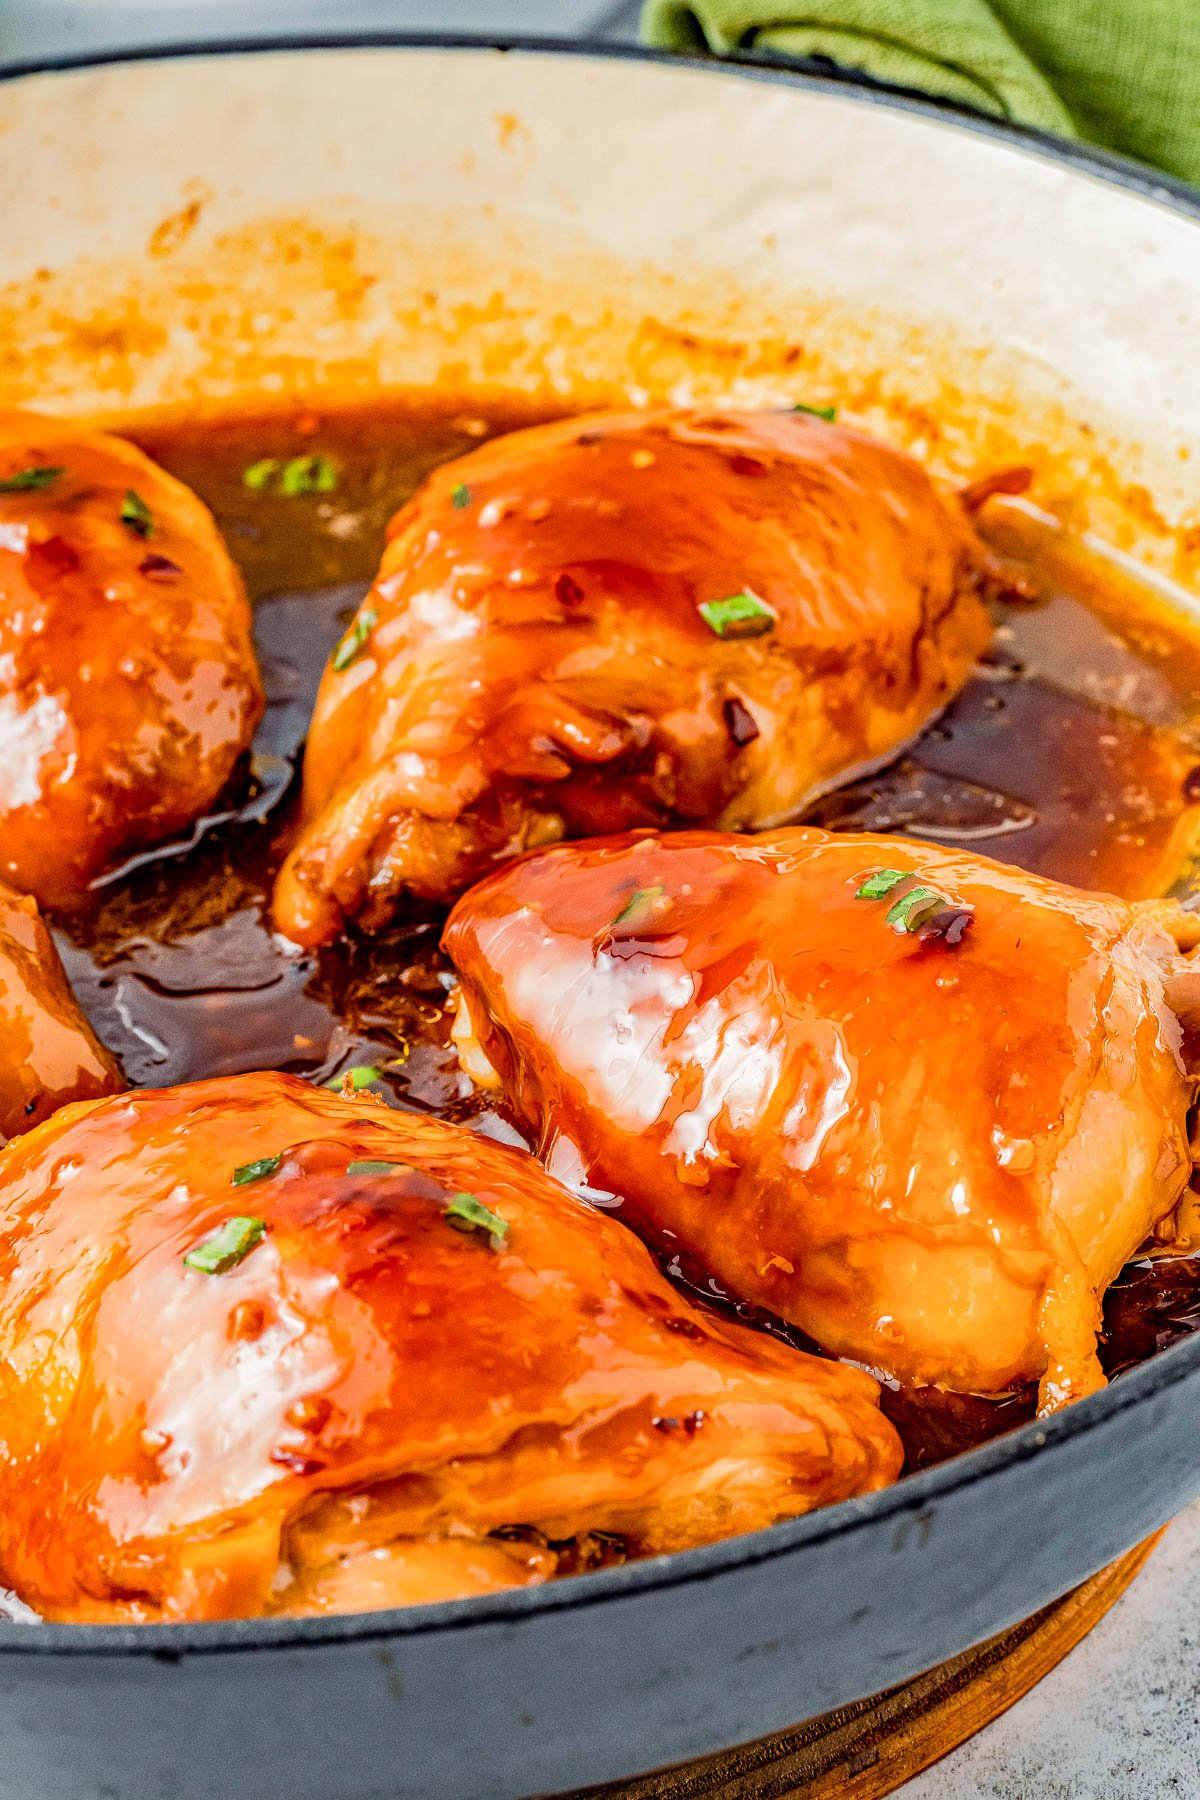 Five chicken breasts covered in shoyu sauce in a white cooking pot, garnished with chopped herbs.